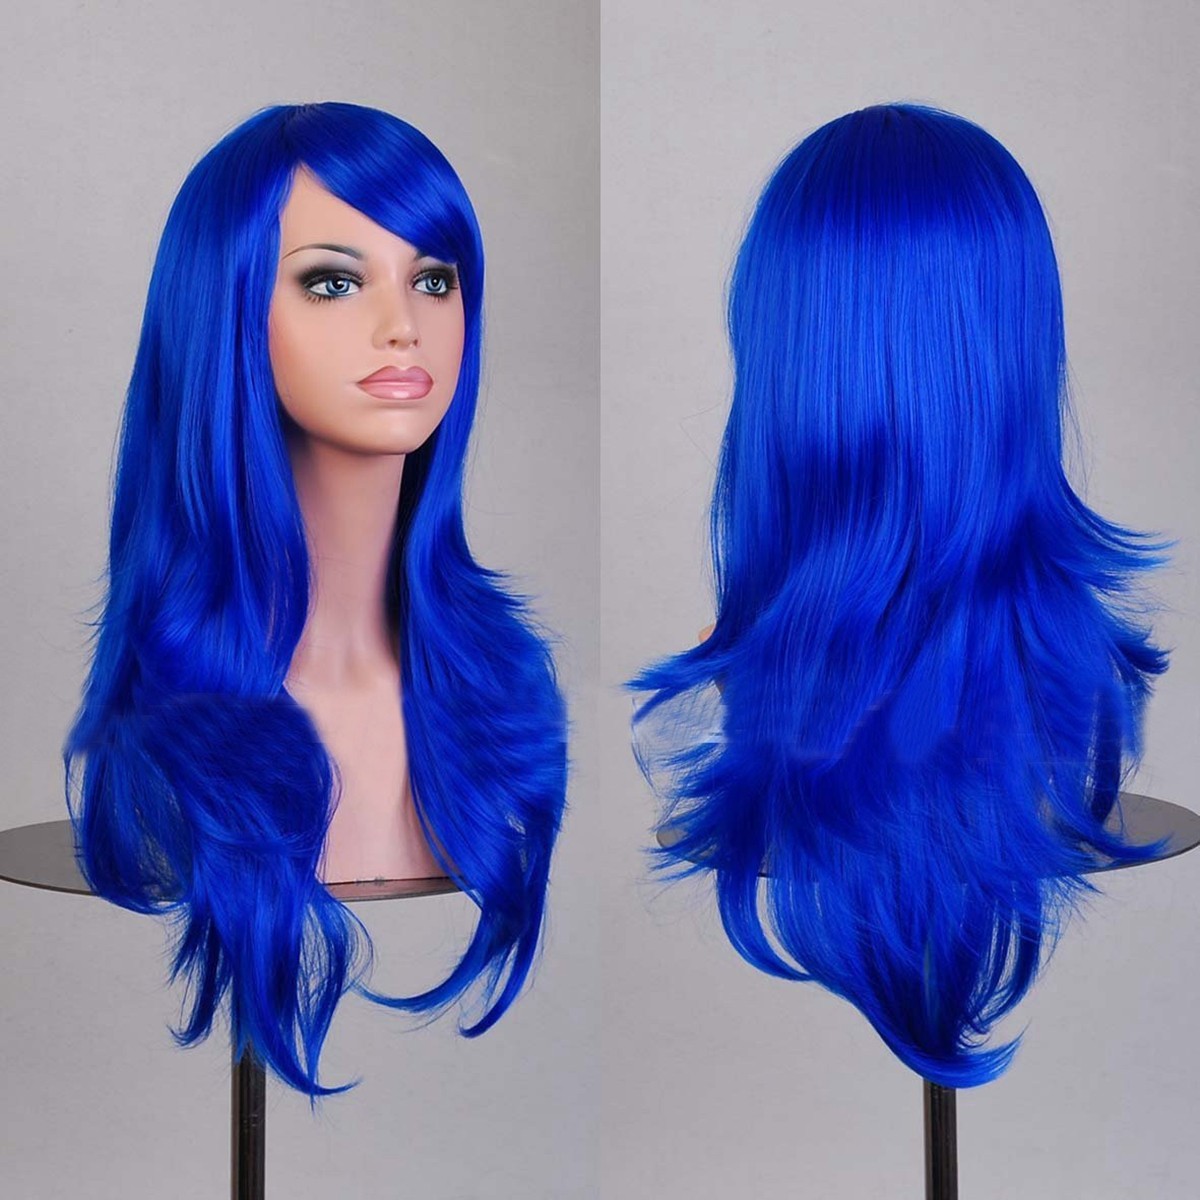 70cm-Womens-Long-Anime-Wigs-Cosplay-Party-Curly-Wavy-Hair-Full-Wig-1029873